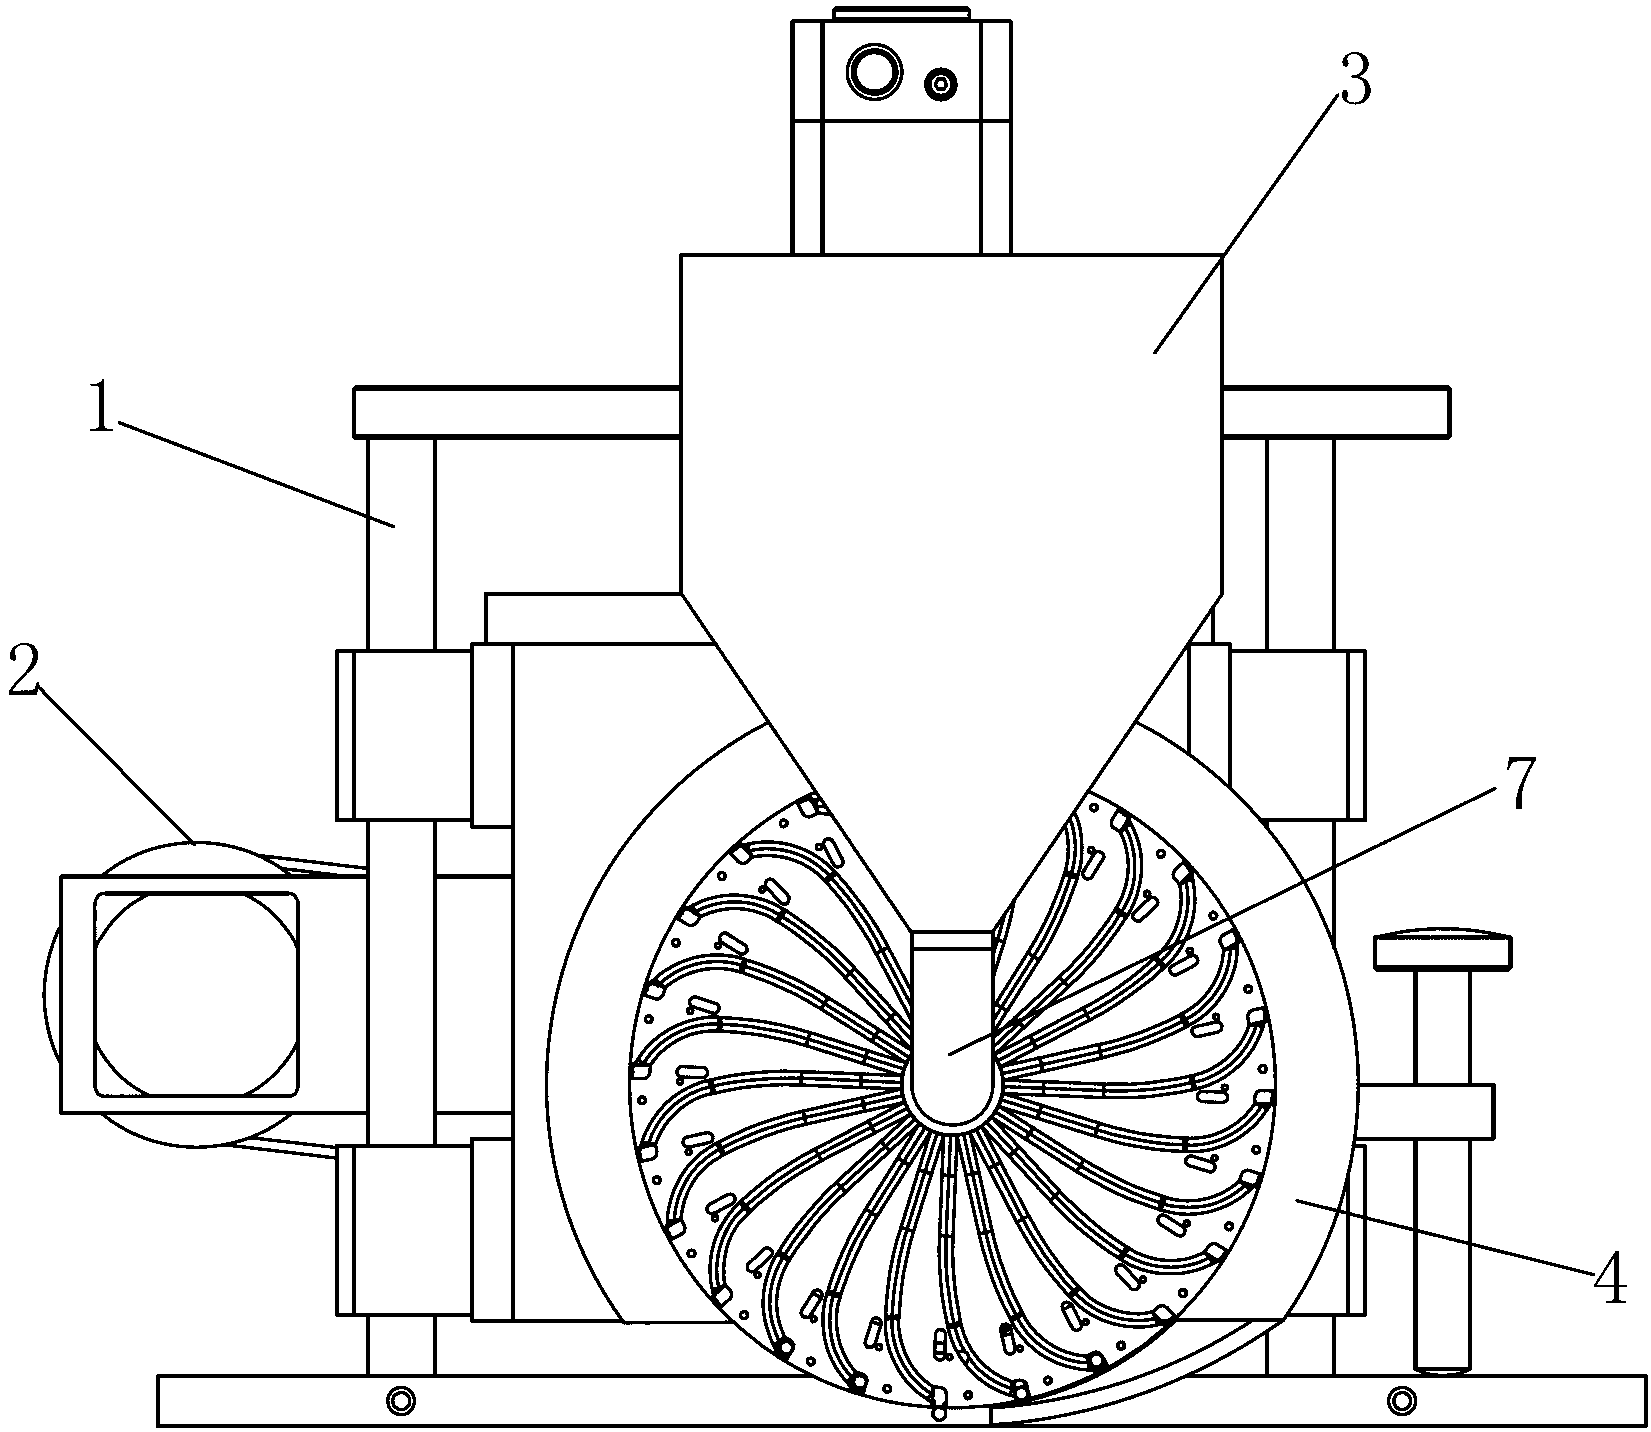 Equipment for producing capsule filter rods